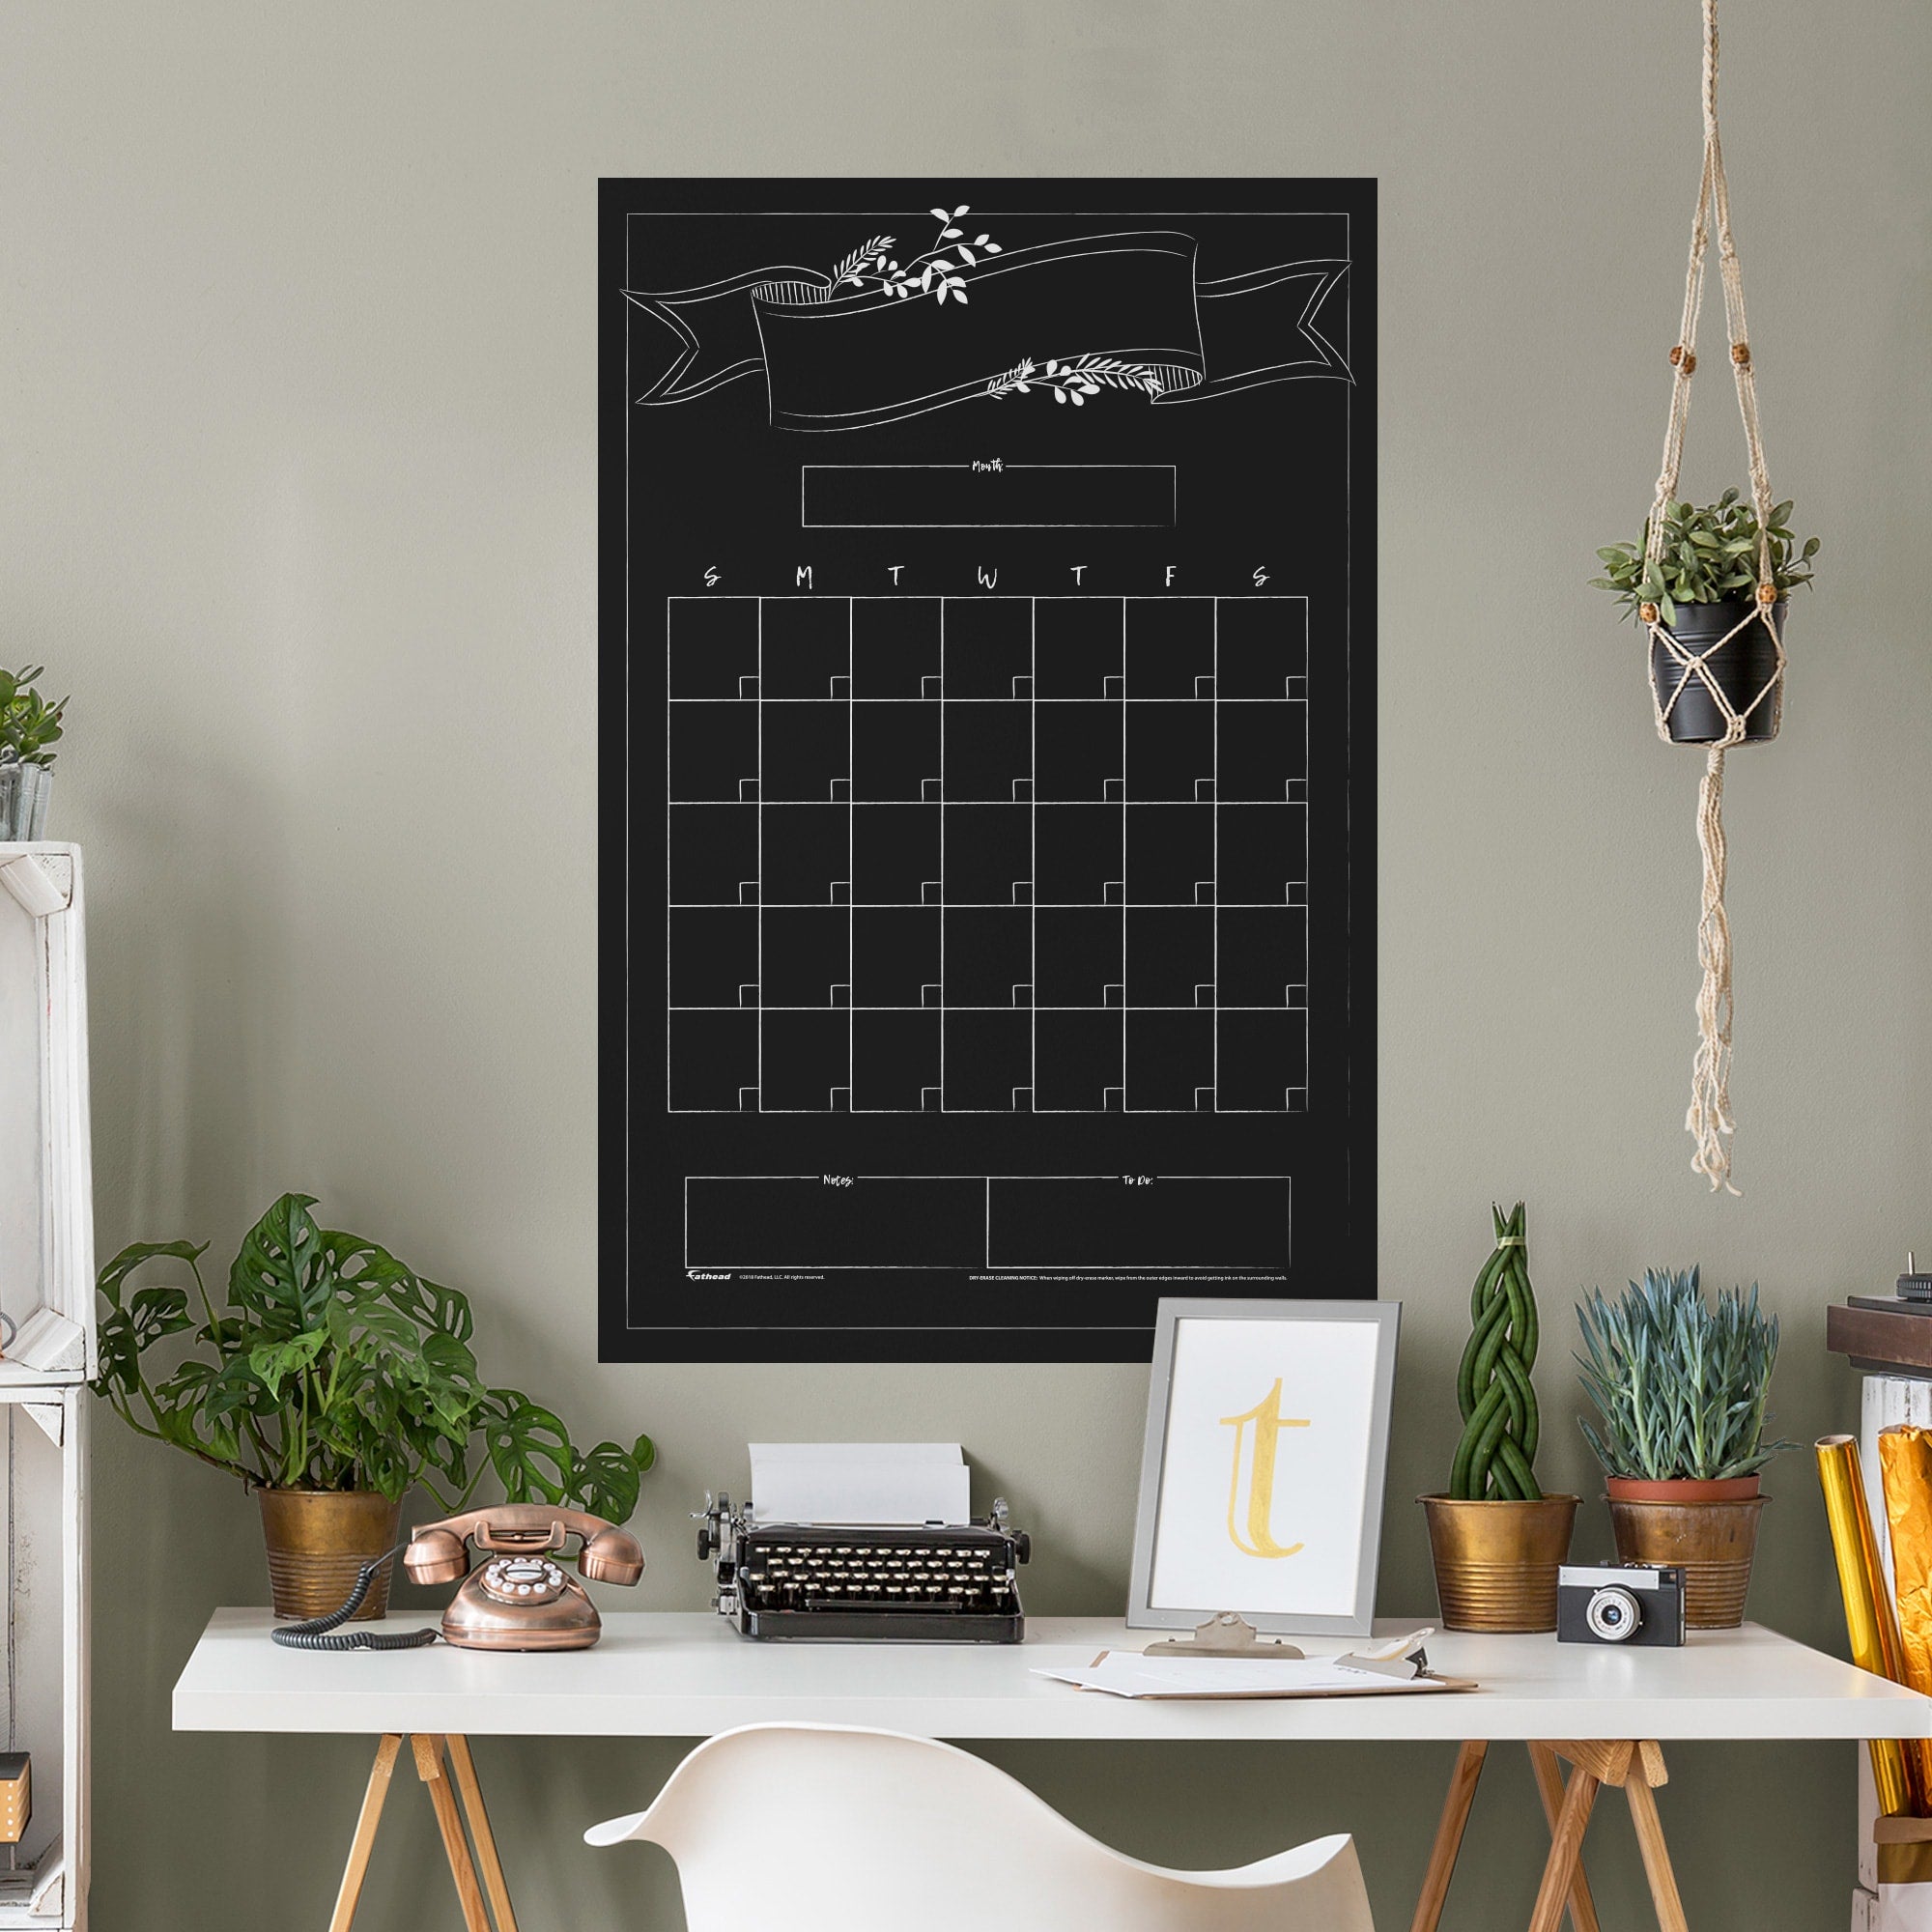 One Month Calendar: Chalkboard Banner Design - Removable Dry Erase Vinyl Decal 26.0"W x 39.5"H by Fathead